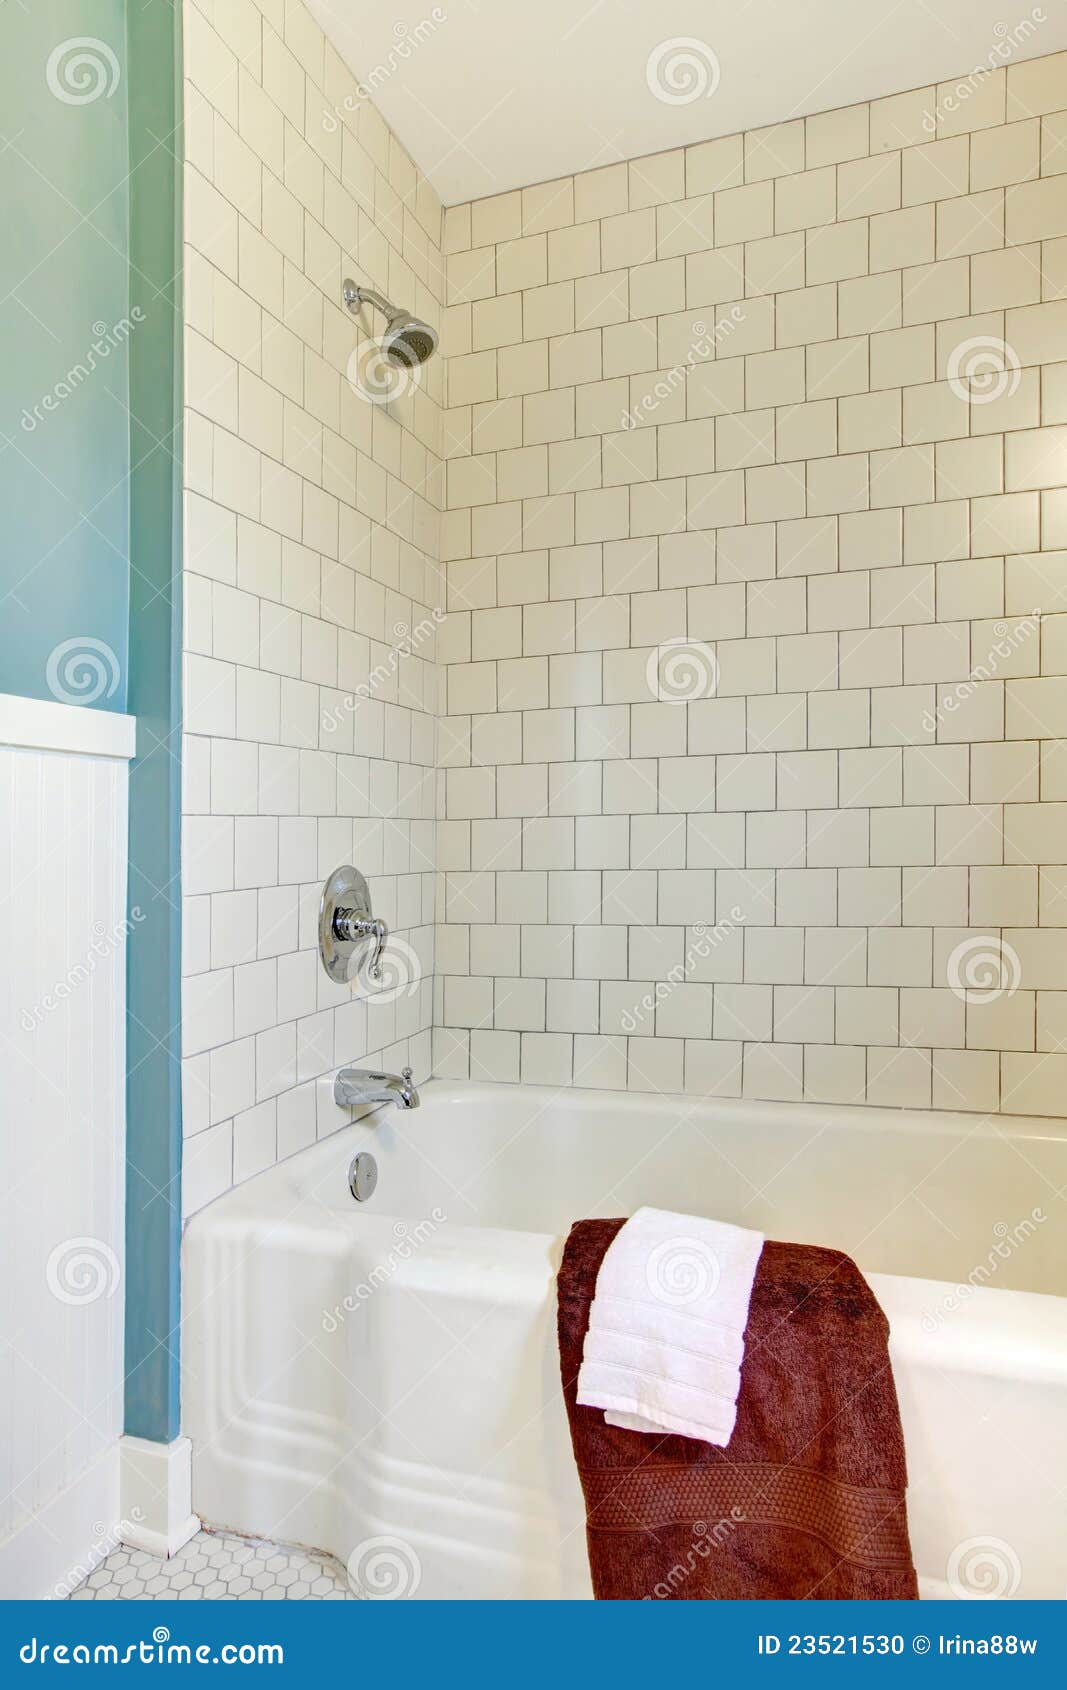 Shower Tub White Classic Tile And Blue Wall. Stock Photo - Image ...